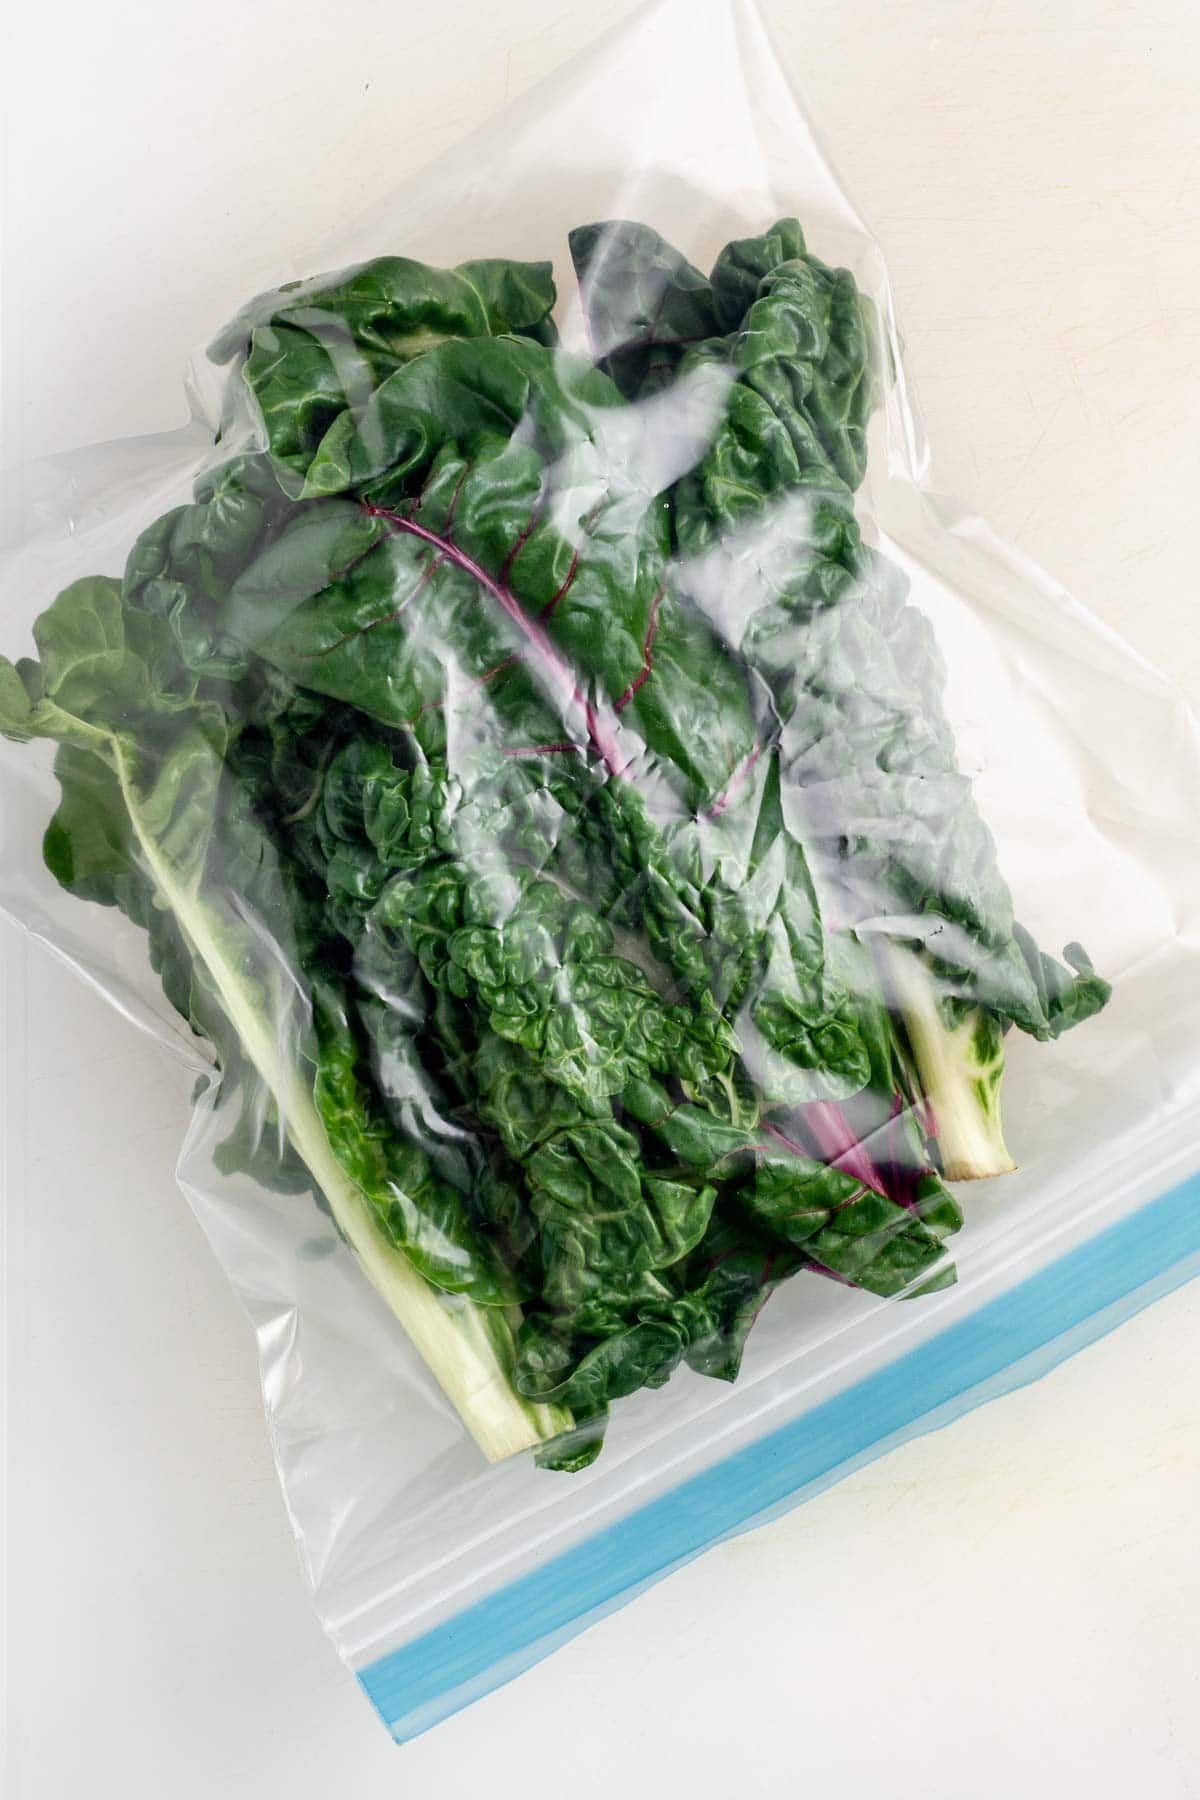 the chard leaves in the bag